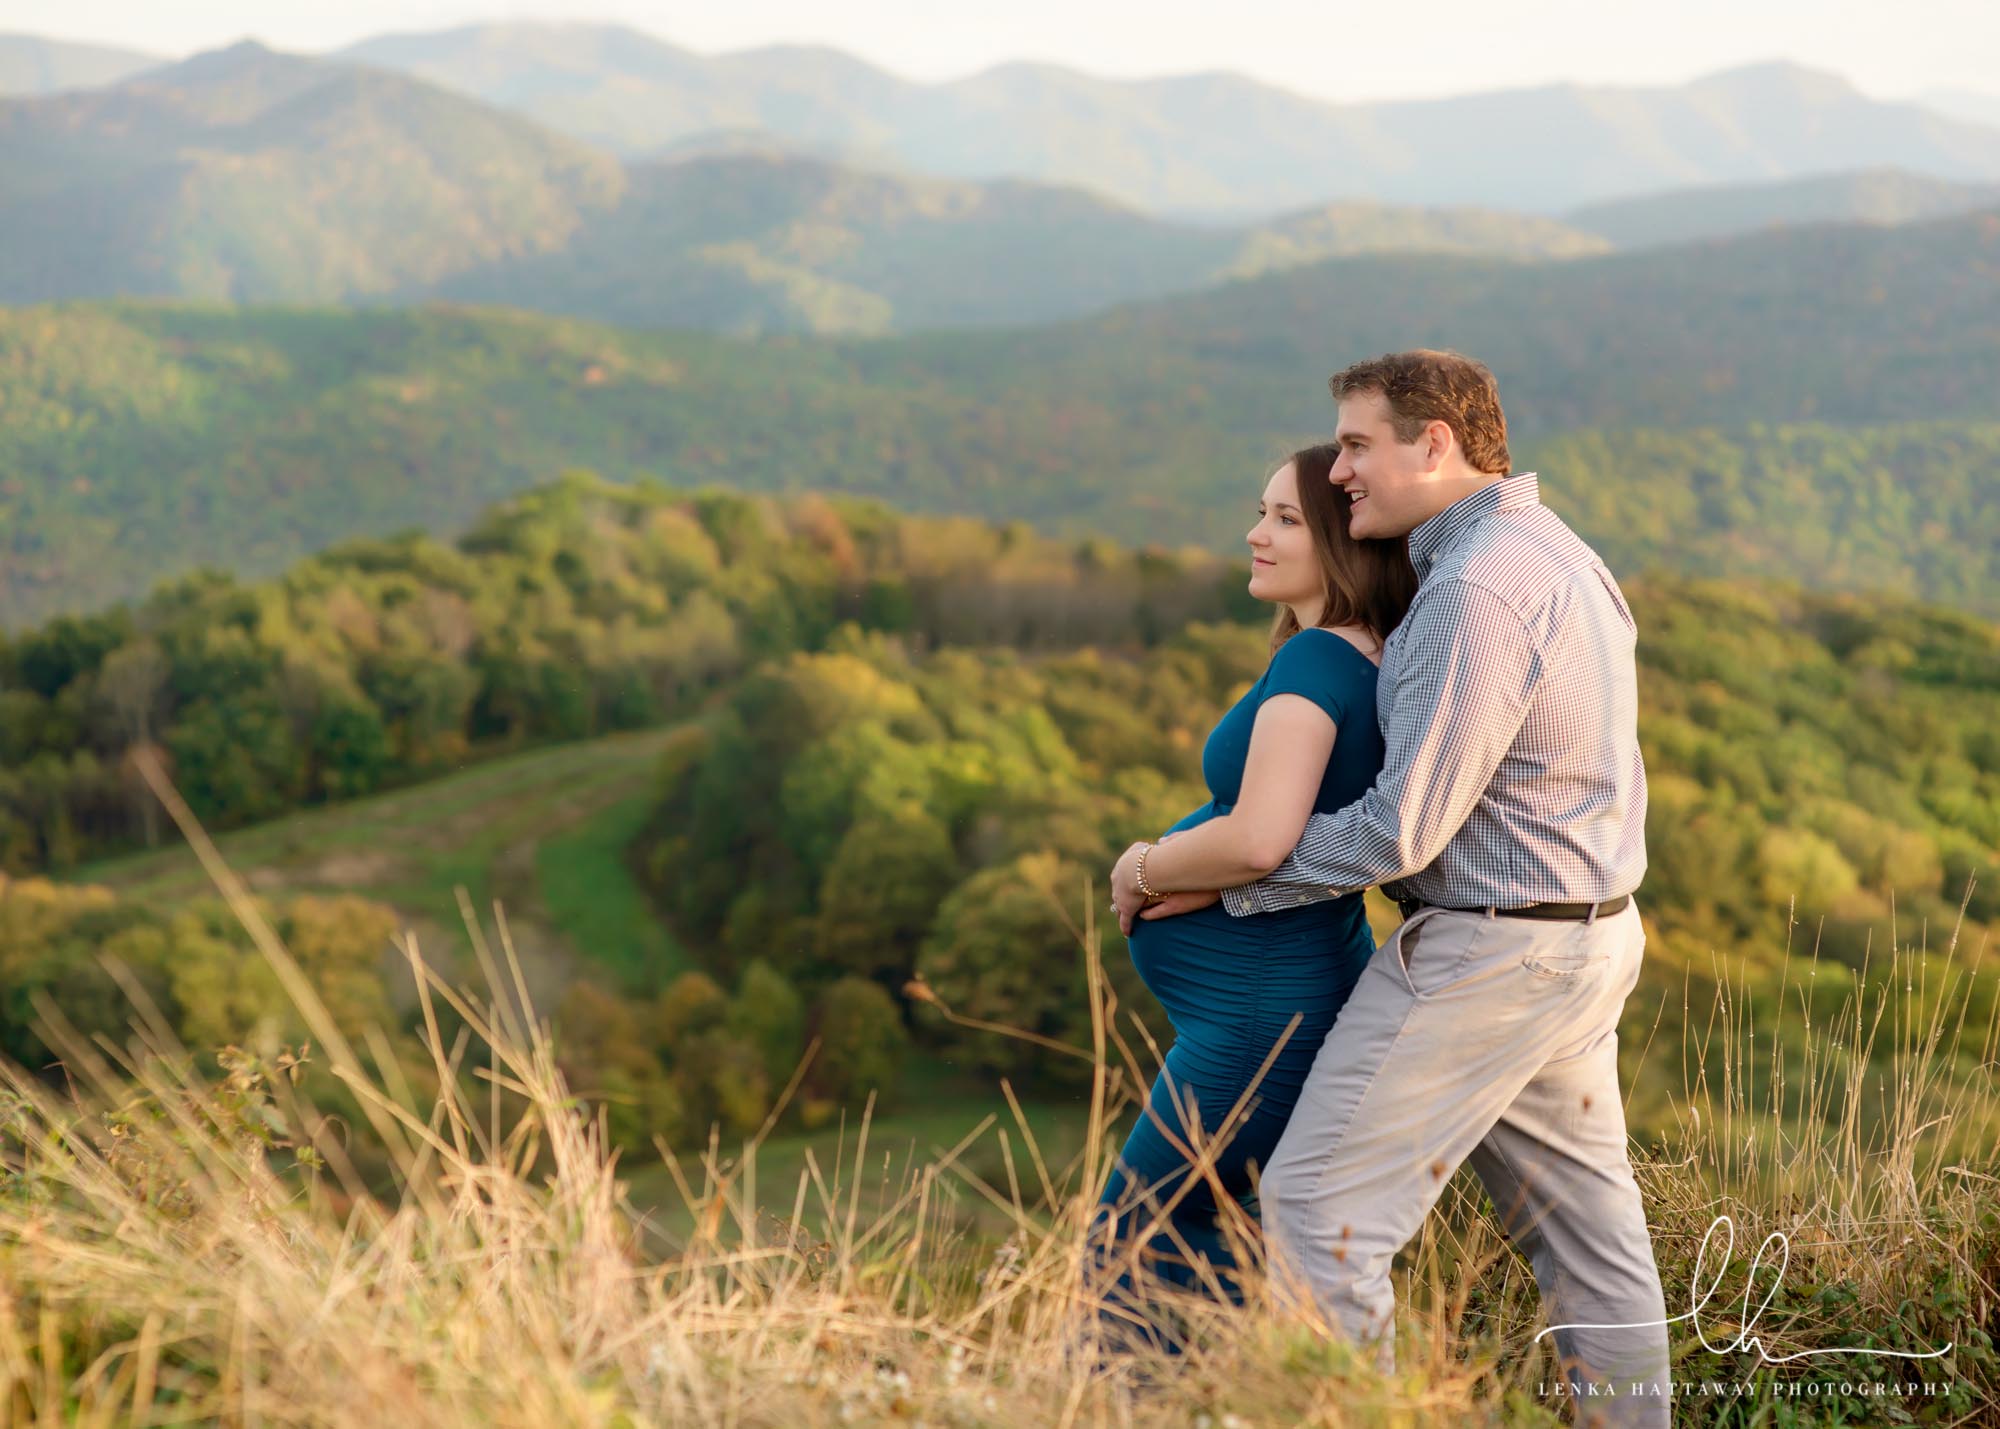 Maternity picture in the mountains. The couple is looking into the mountains.